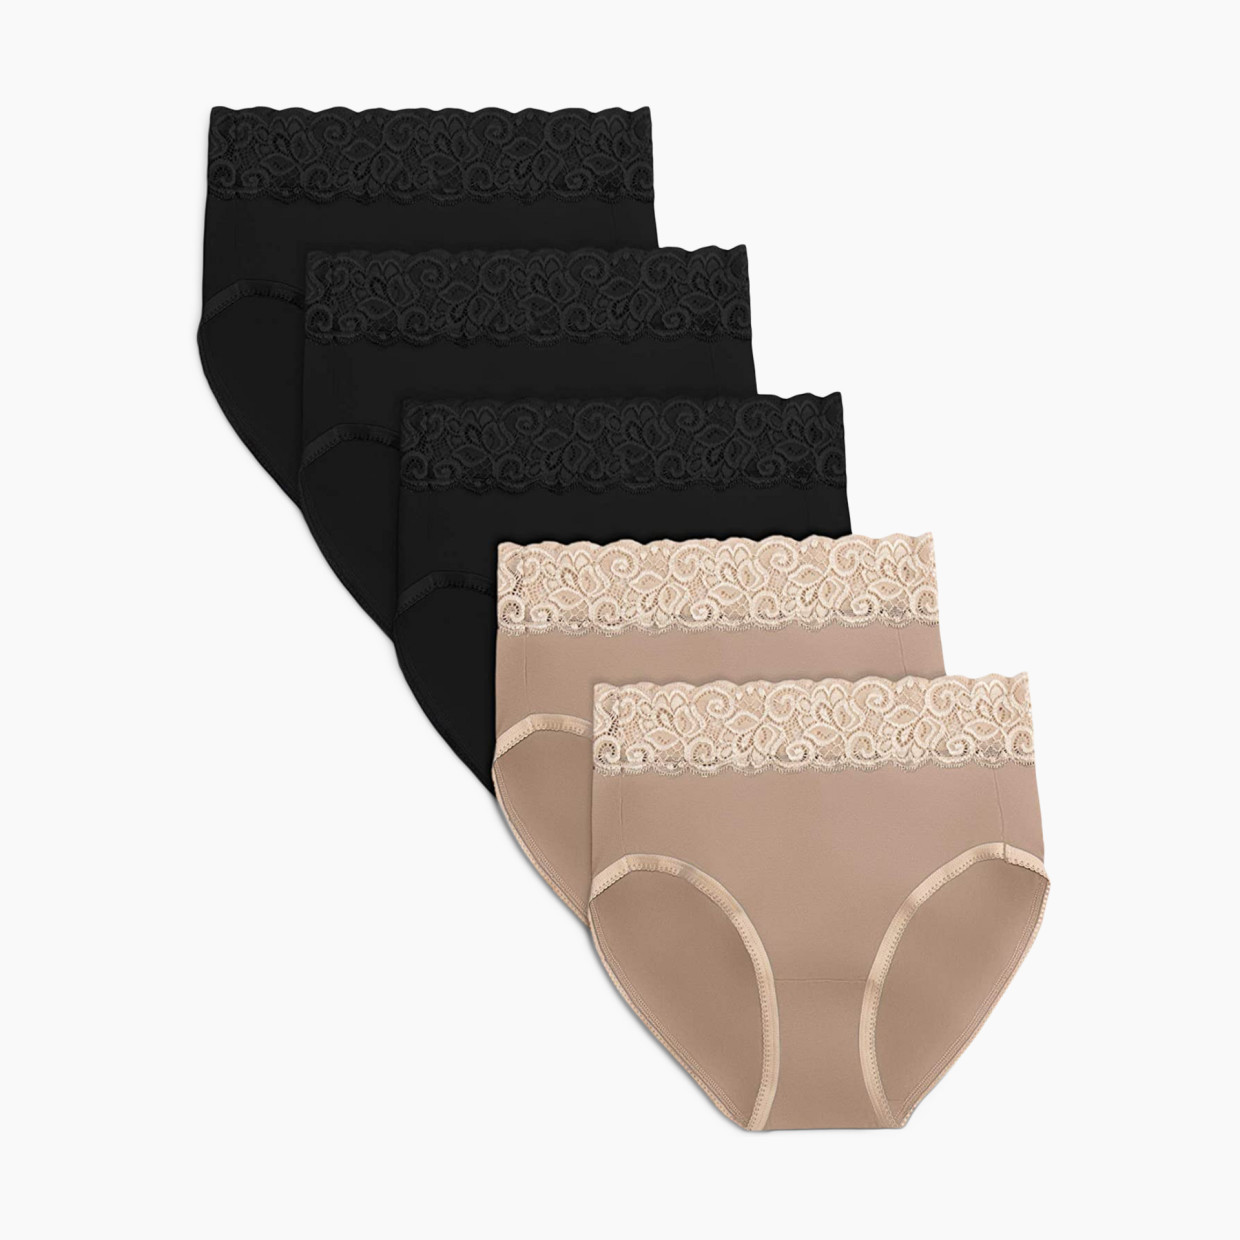 Kindred Bravely High Waist Postpartum Underwear & C-Section Recovery  Maternity Panties (5 Pack) - Neutrals, Small